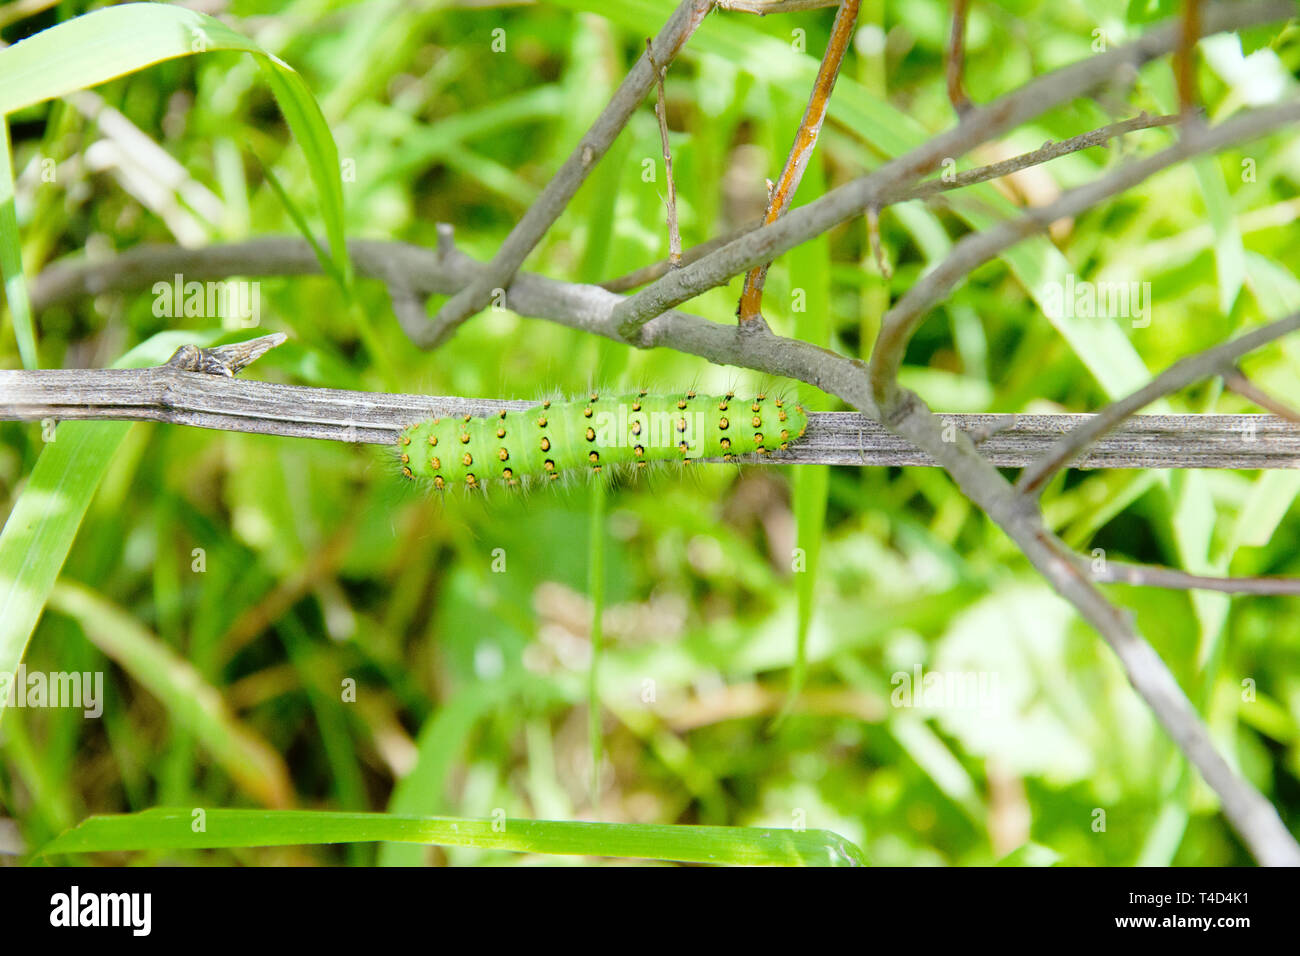 Fat green caterpillar with yellow spots around the body Stock Photo